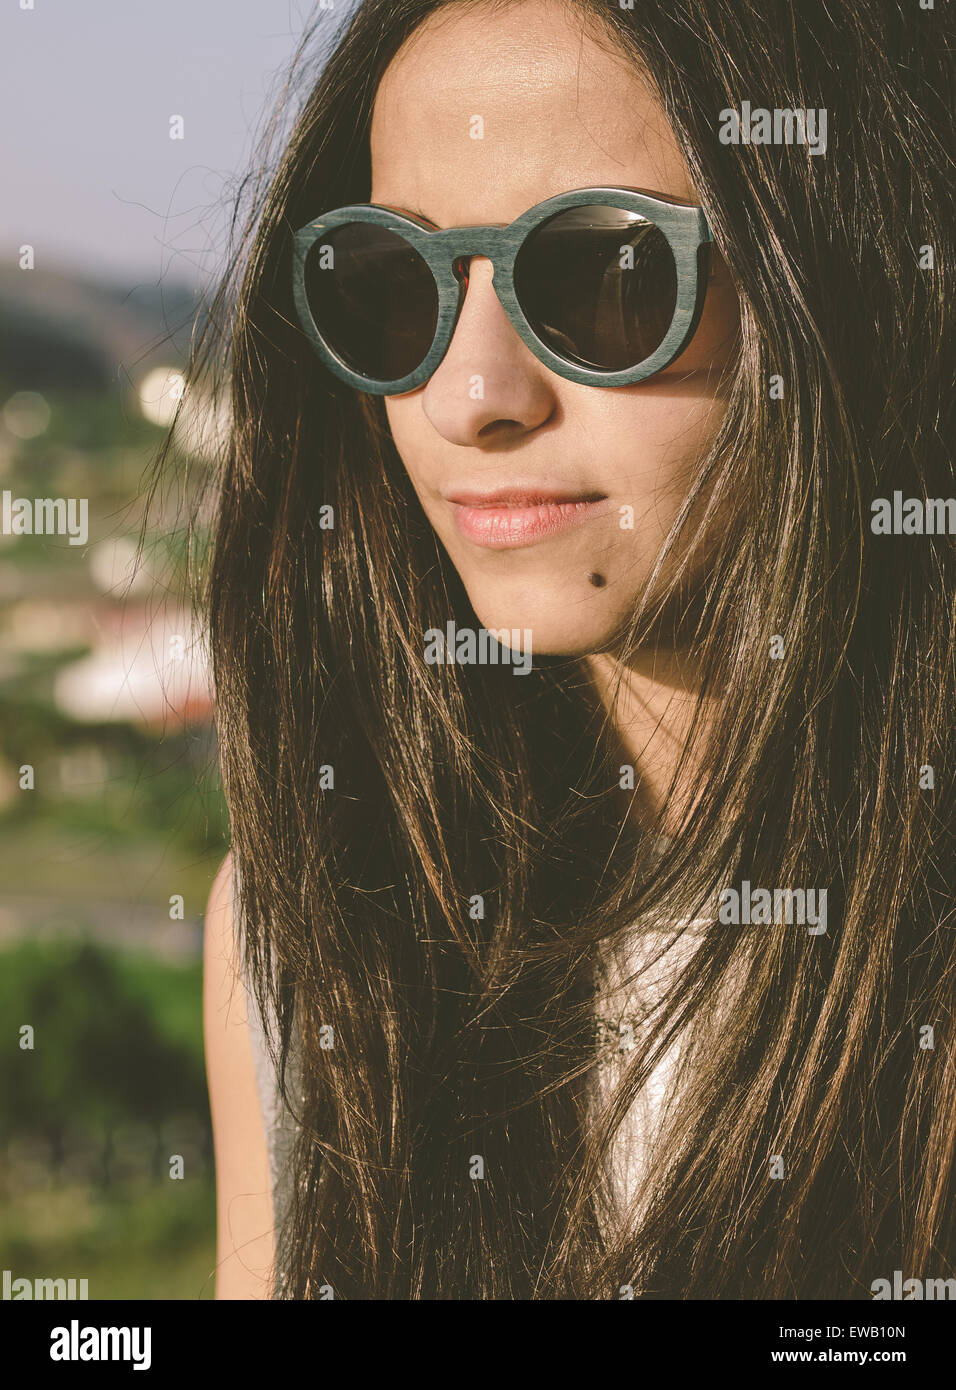 Brunette woman with sunglasses in a portrait outdoors Stock Photo